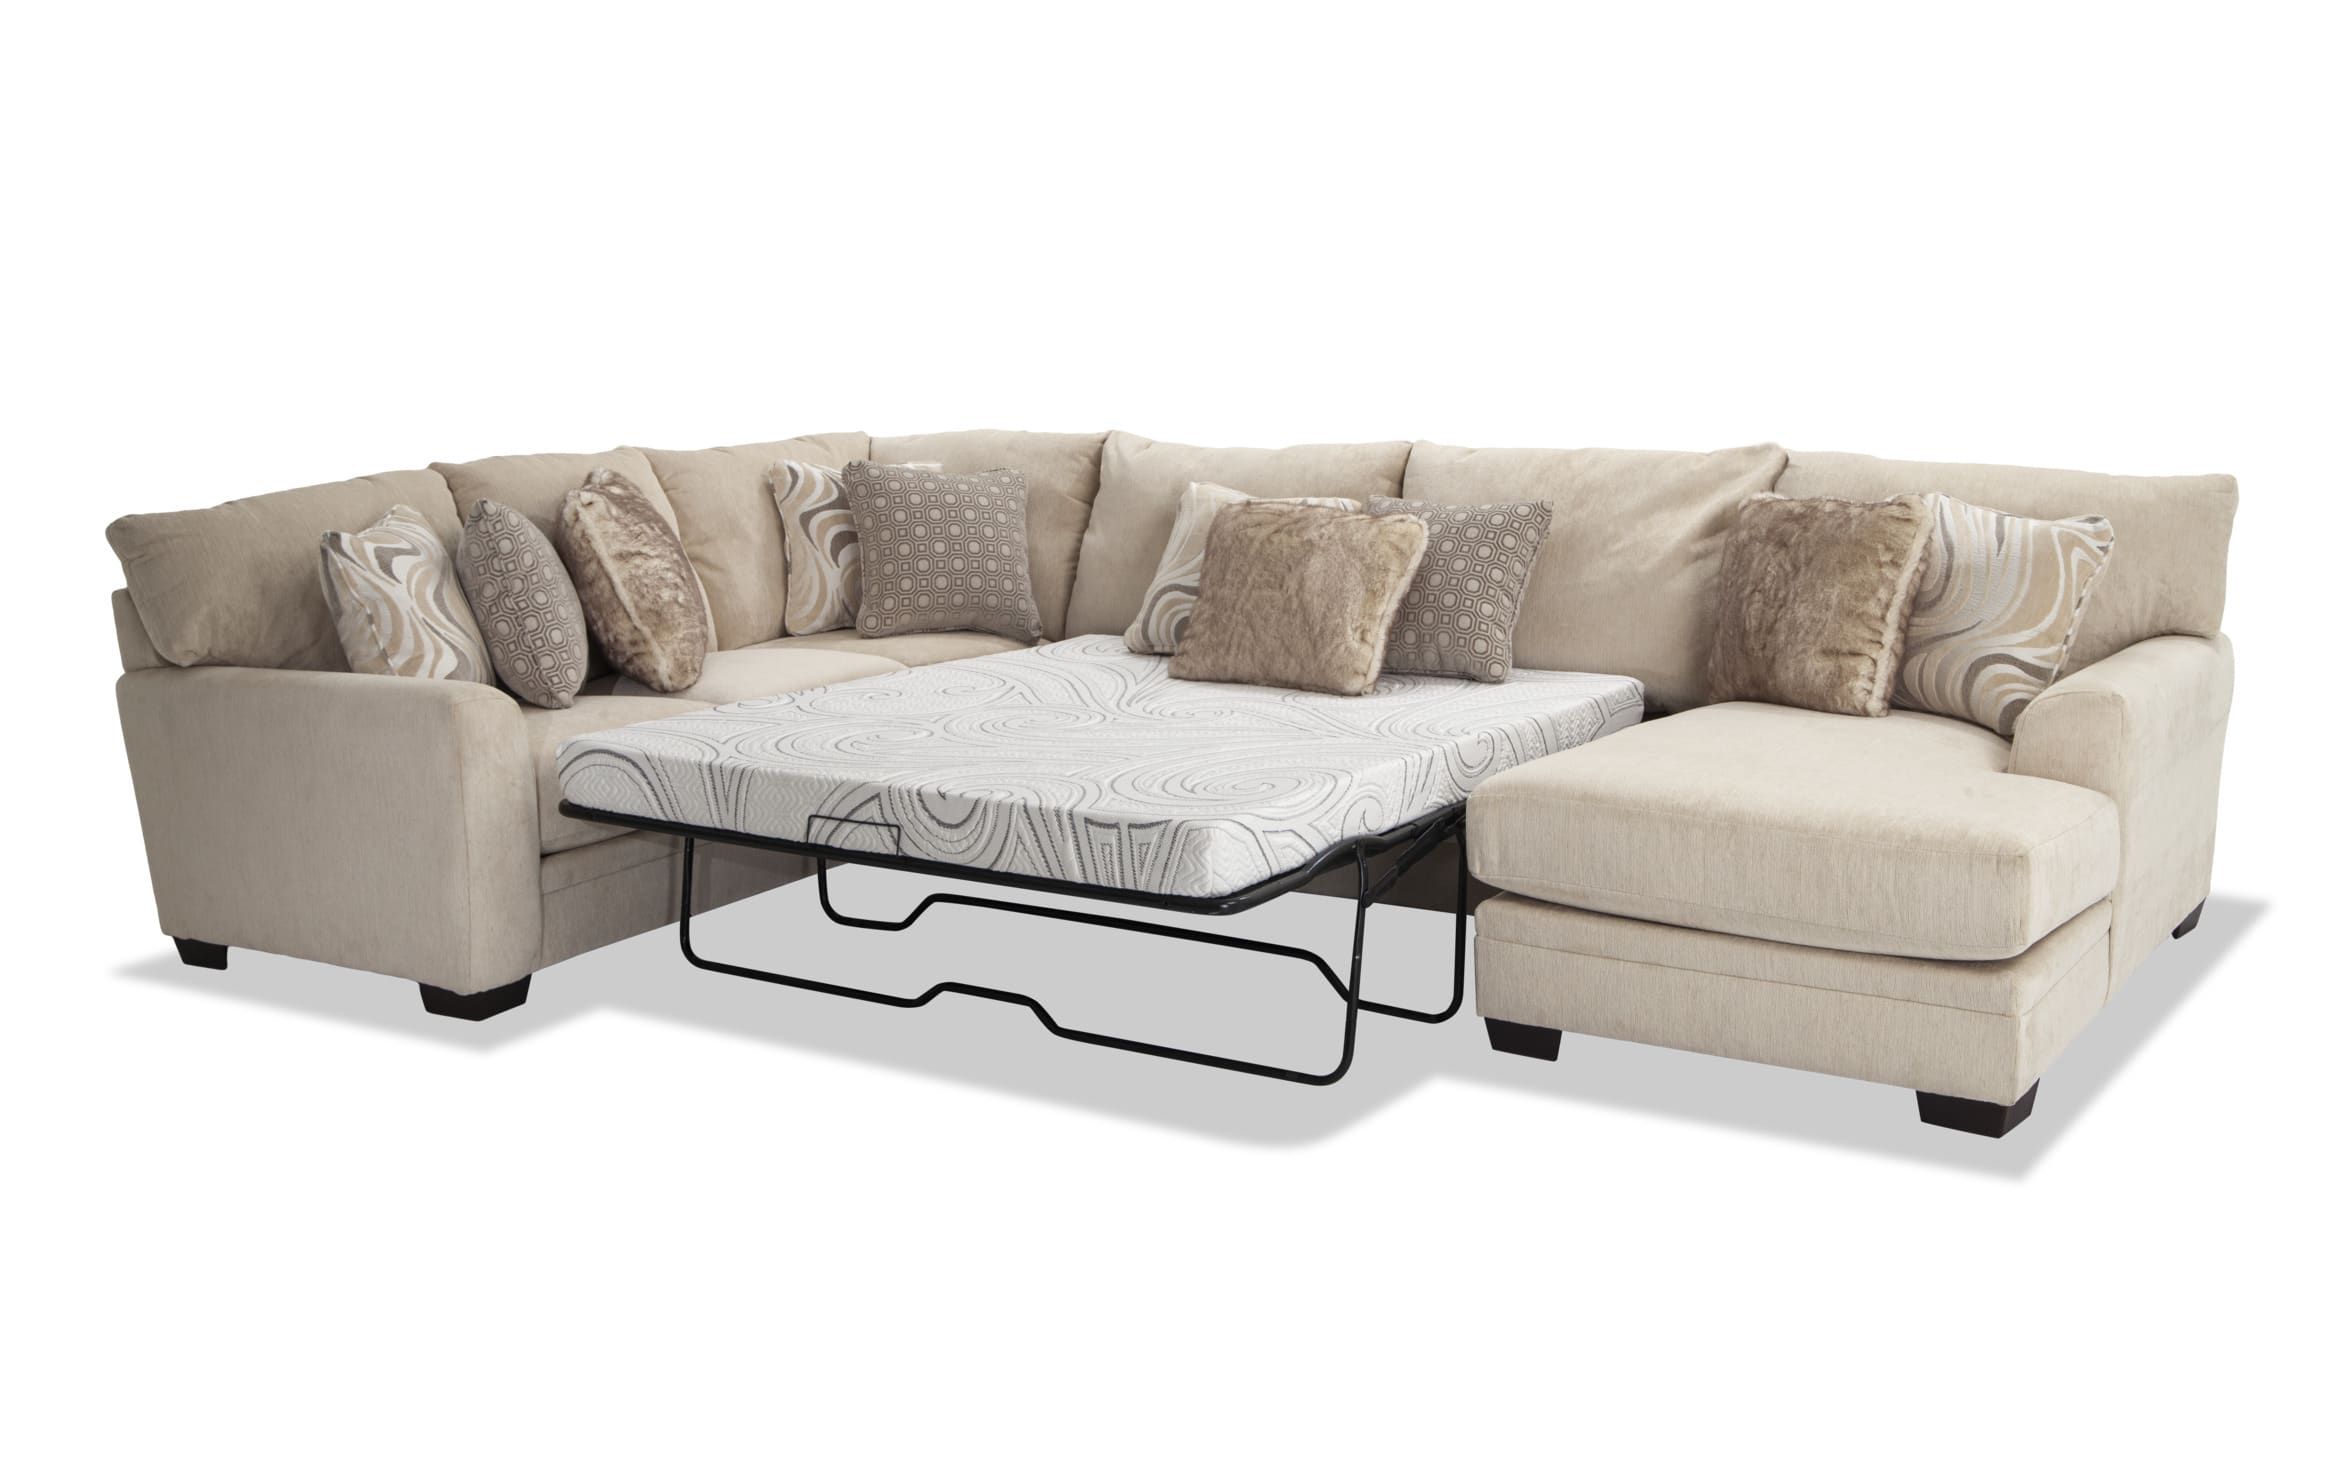 Luxe Cream 4 Piece Left Arm Facing Bob O Pedic Cooling Queen Sleeper  Sectional With Chaise | Bob'S Discount Furniture With Left Or Right Facing Sleeper Sectional Sofas (View 2 of 15)